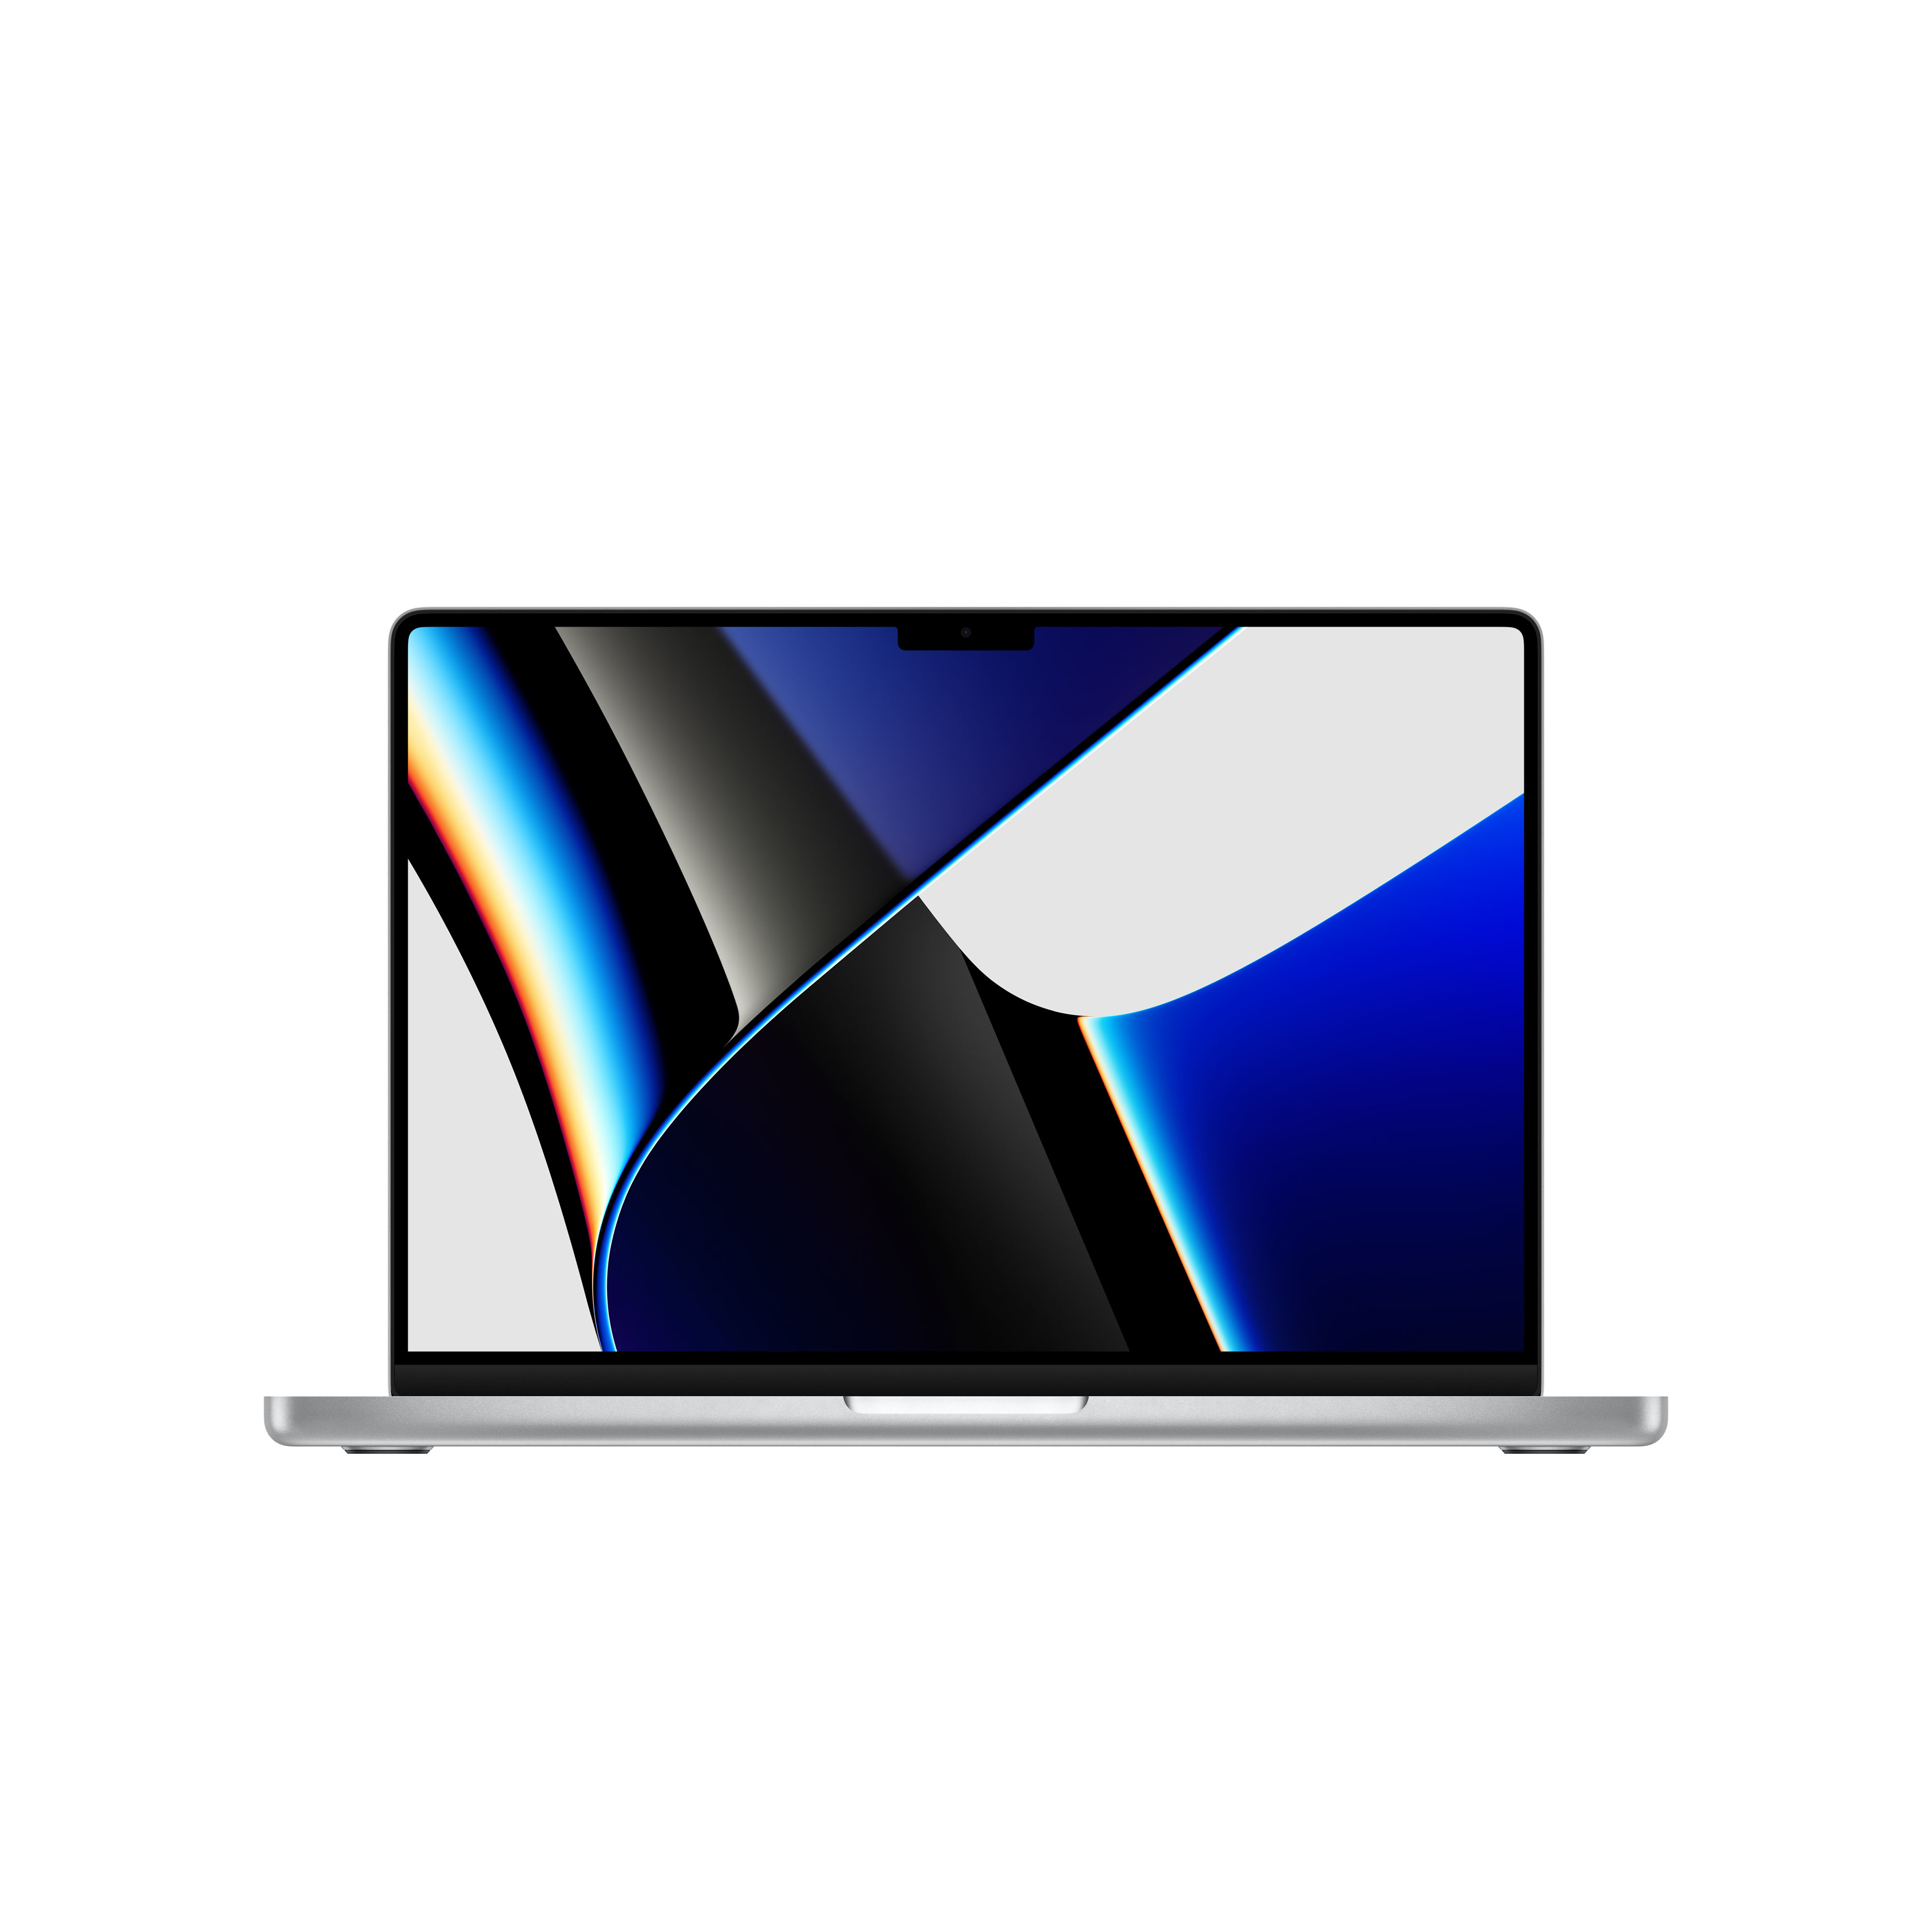  14inch (2021) MacBook Pro  M1 Pro chip with 8-core CPU and 14-core GPU 512GB SSD Silver Qwerty